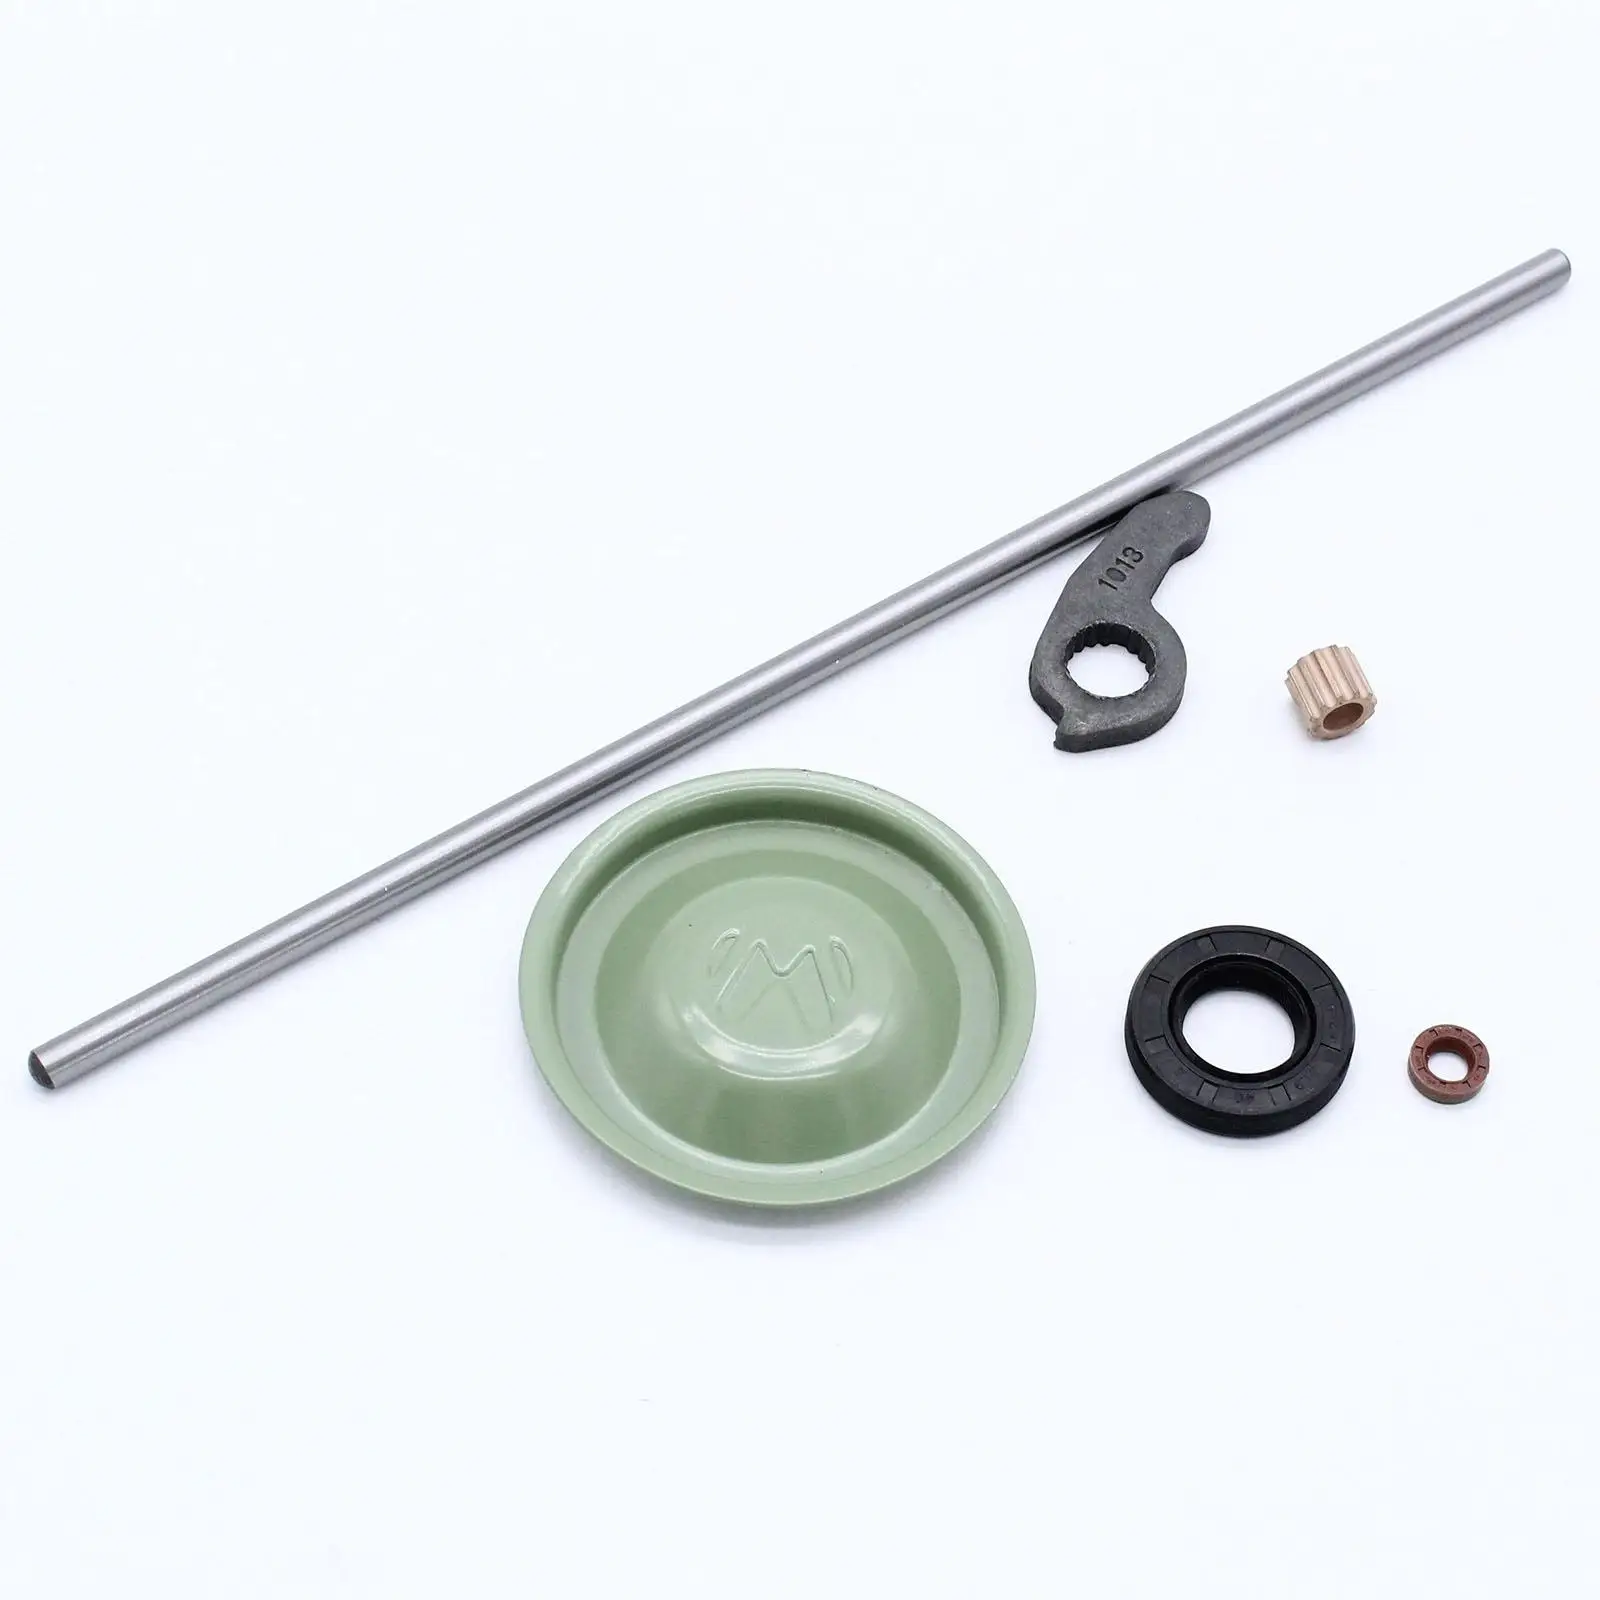 Clutch Release Green Bearing Caps Kits 02K141709A Clutch Pushrod Lever Kit Fit for Golf MK1 MK2 Replacement Easy to Install